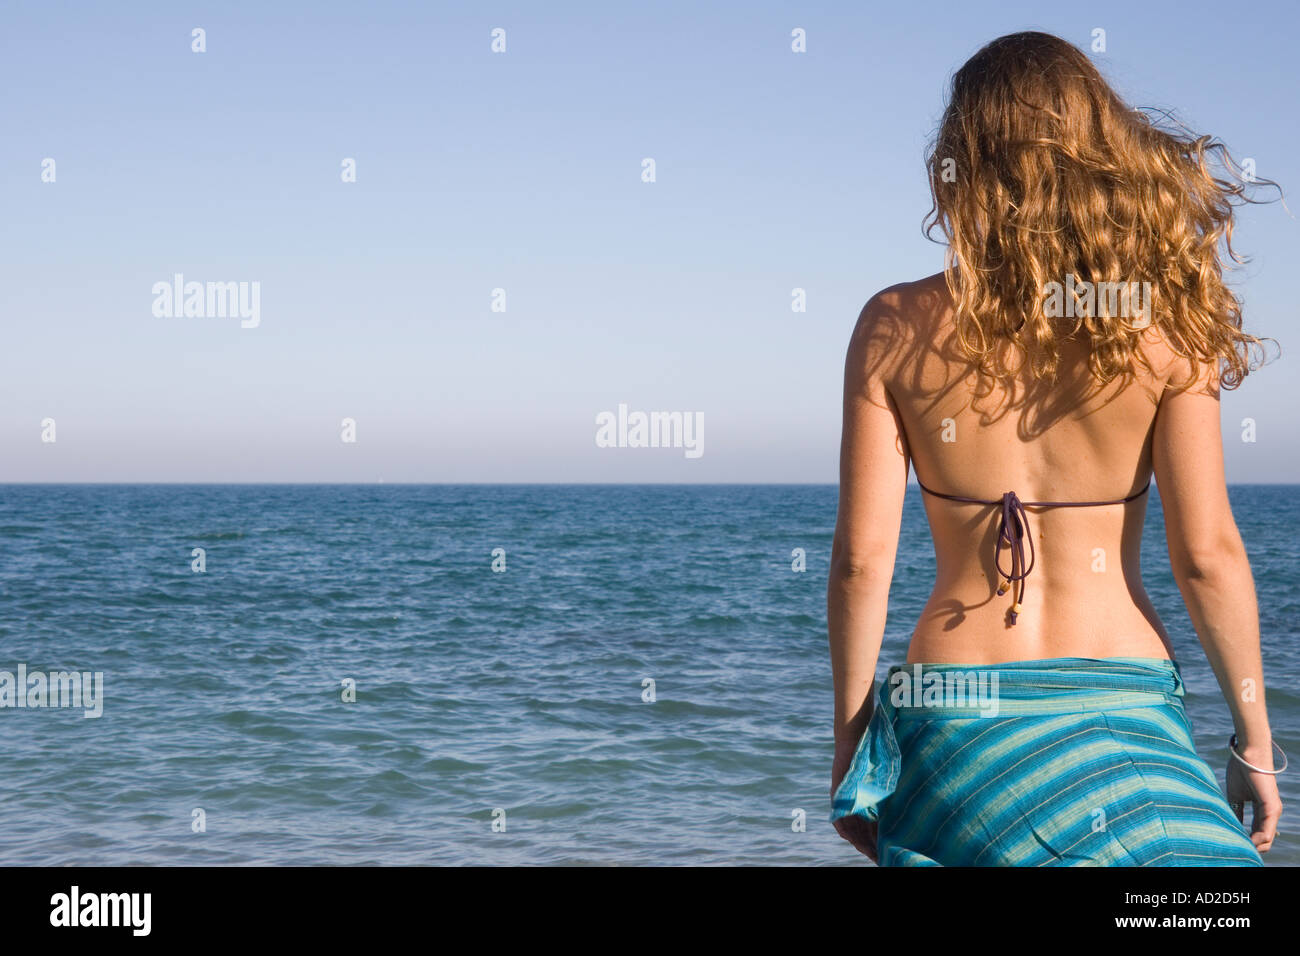 Young woman stood looking out to sea Stock Photo